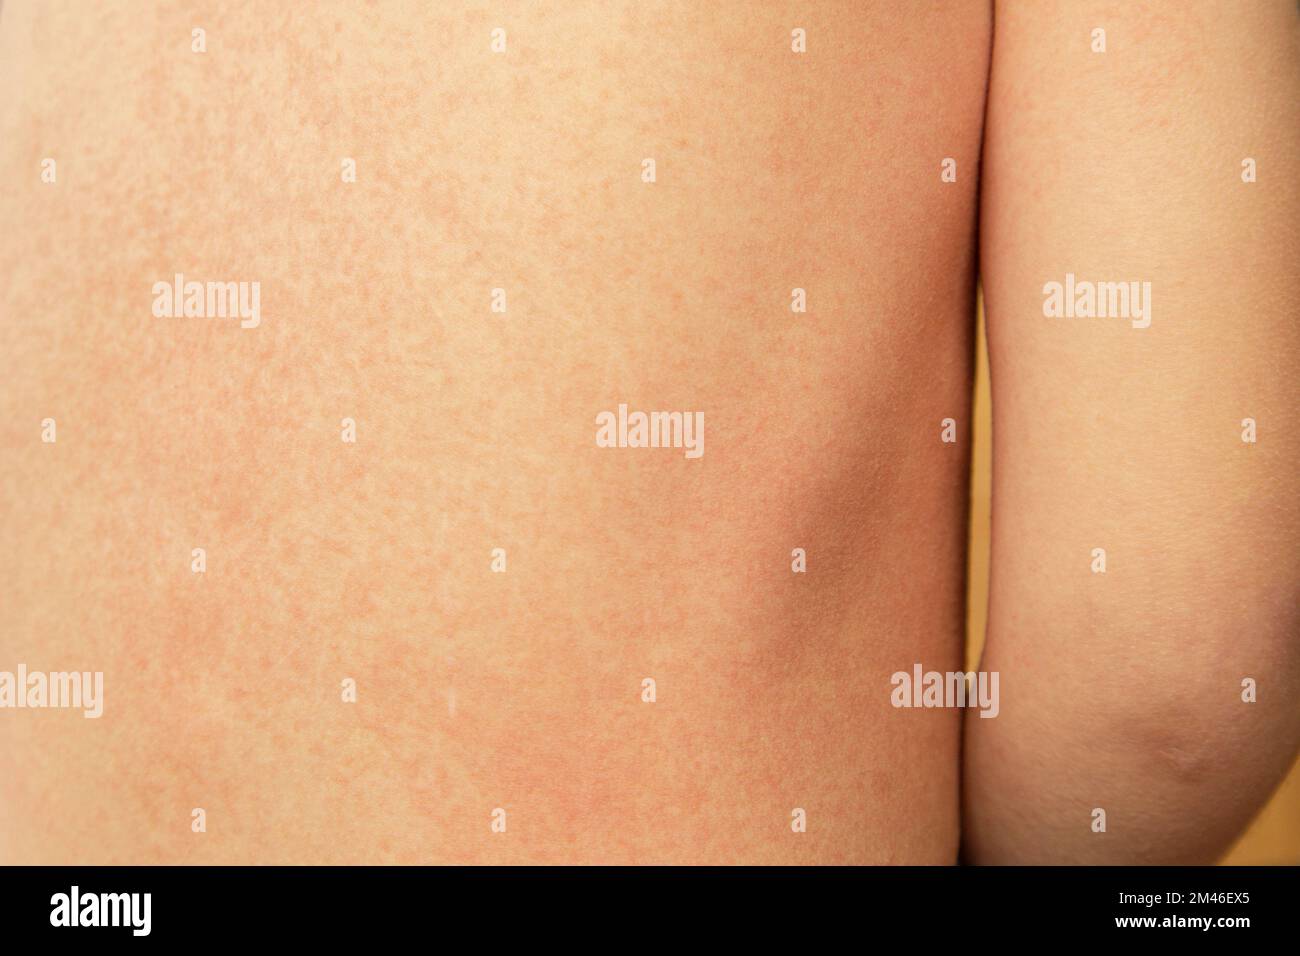 Rash on the back of a small child with scarlet fever caused by group A streptococcus Stock Photo